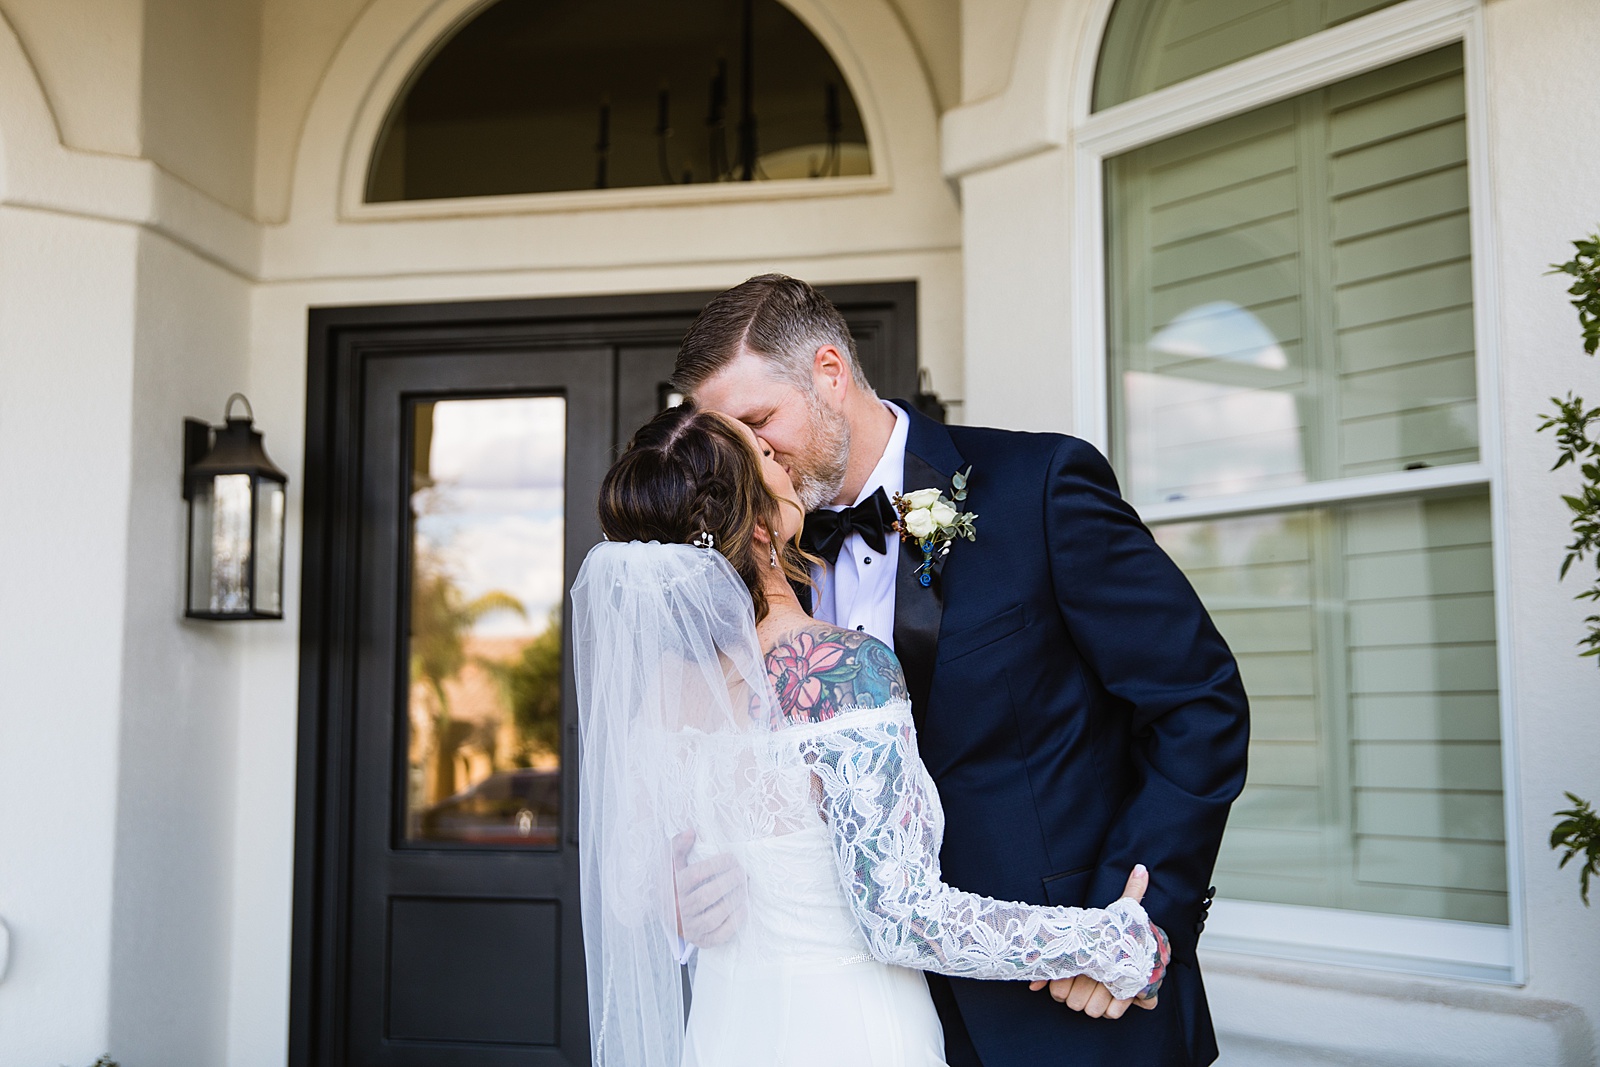 Bride and groom share an intimate moment during their first look at their backyard wedding by Phoenix wedding photographer PMA Photography.